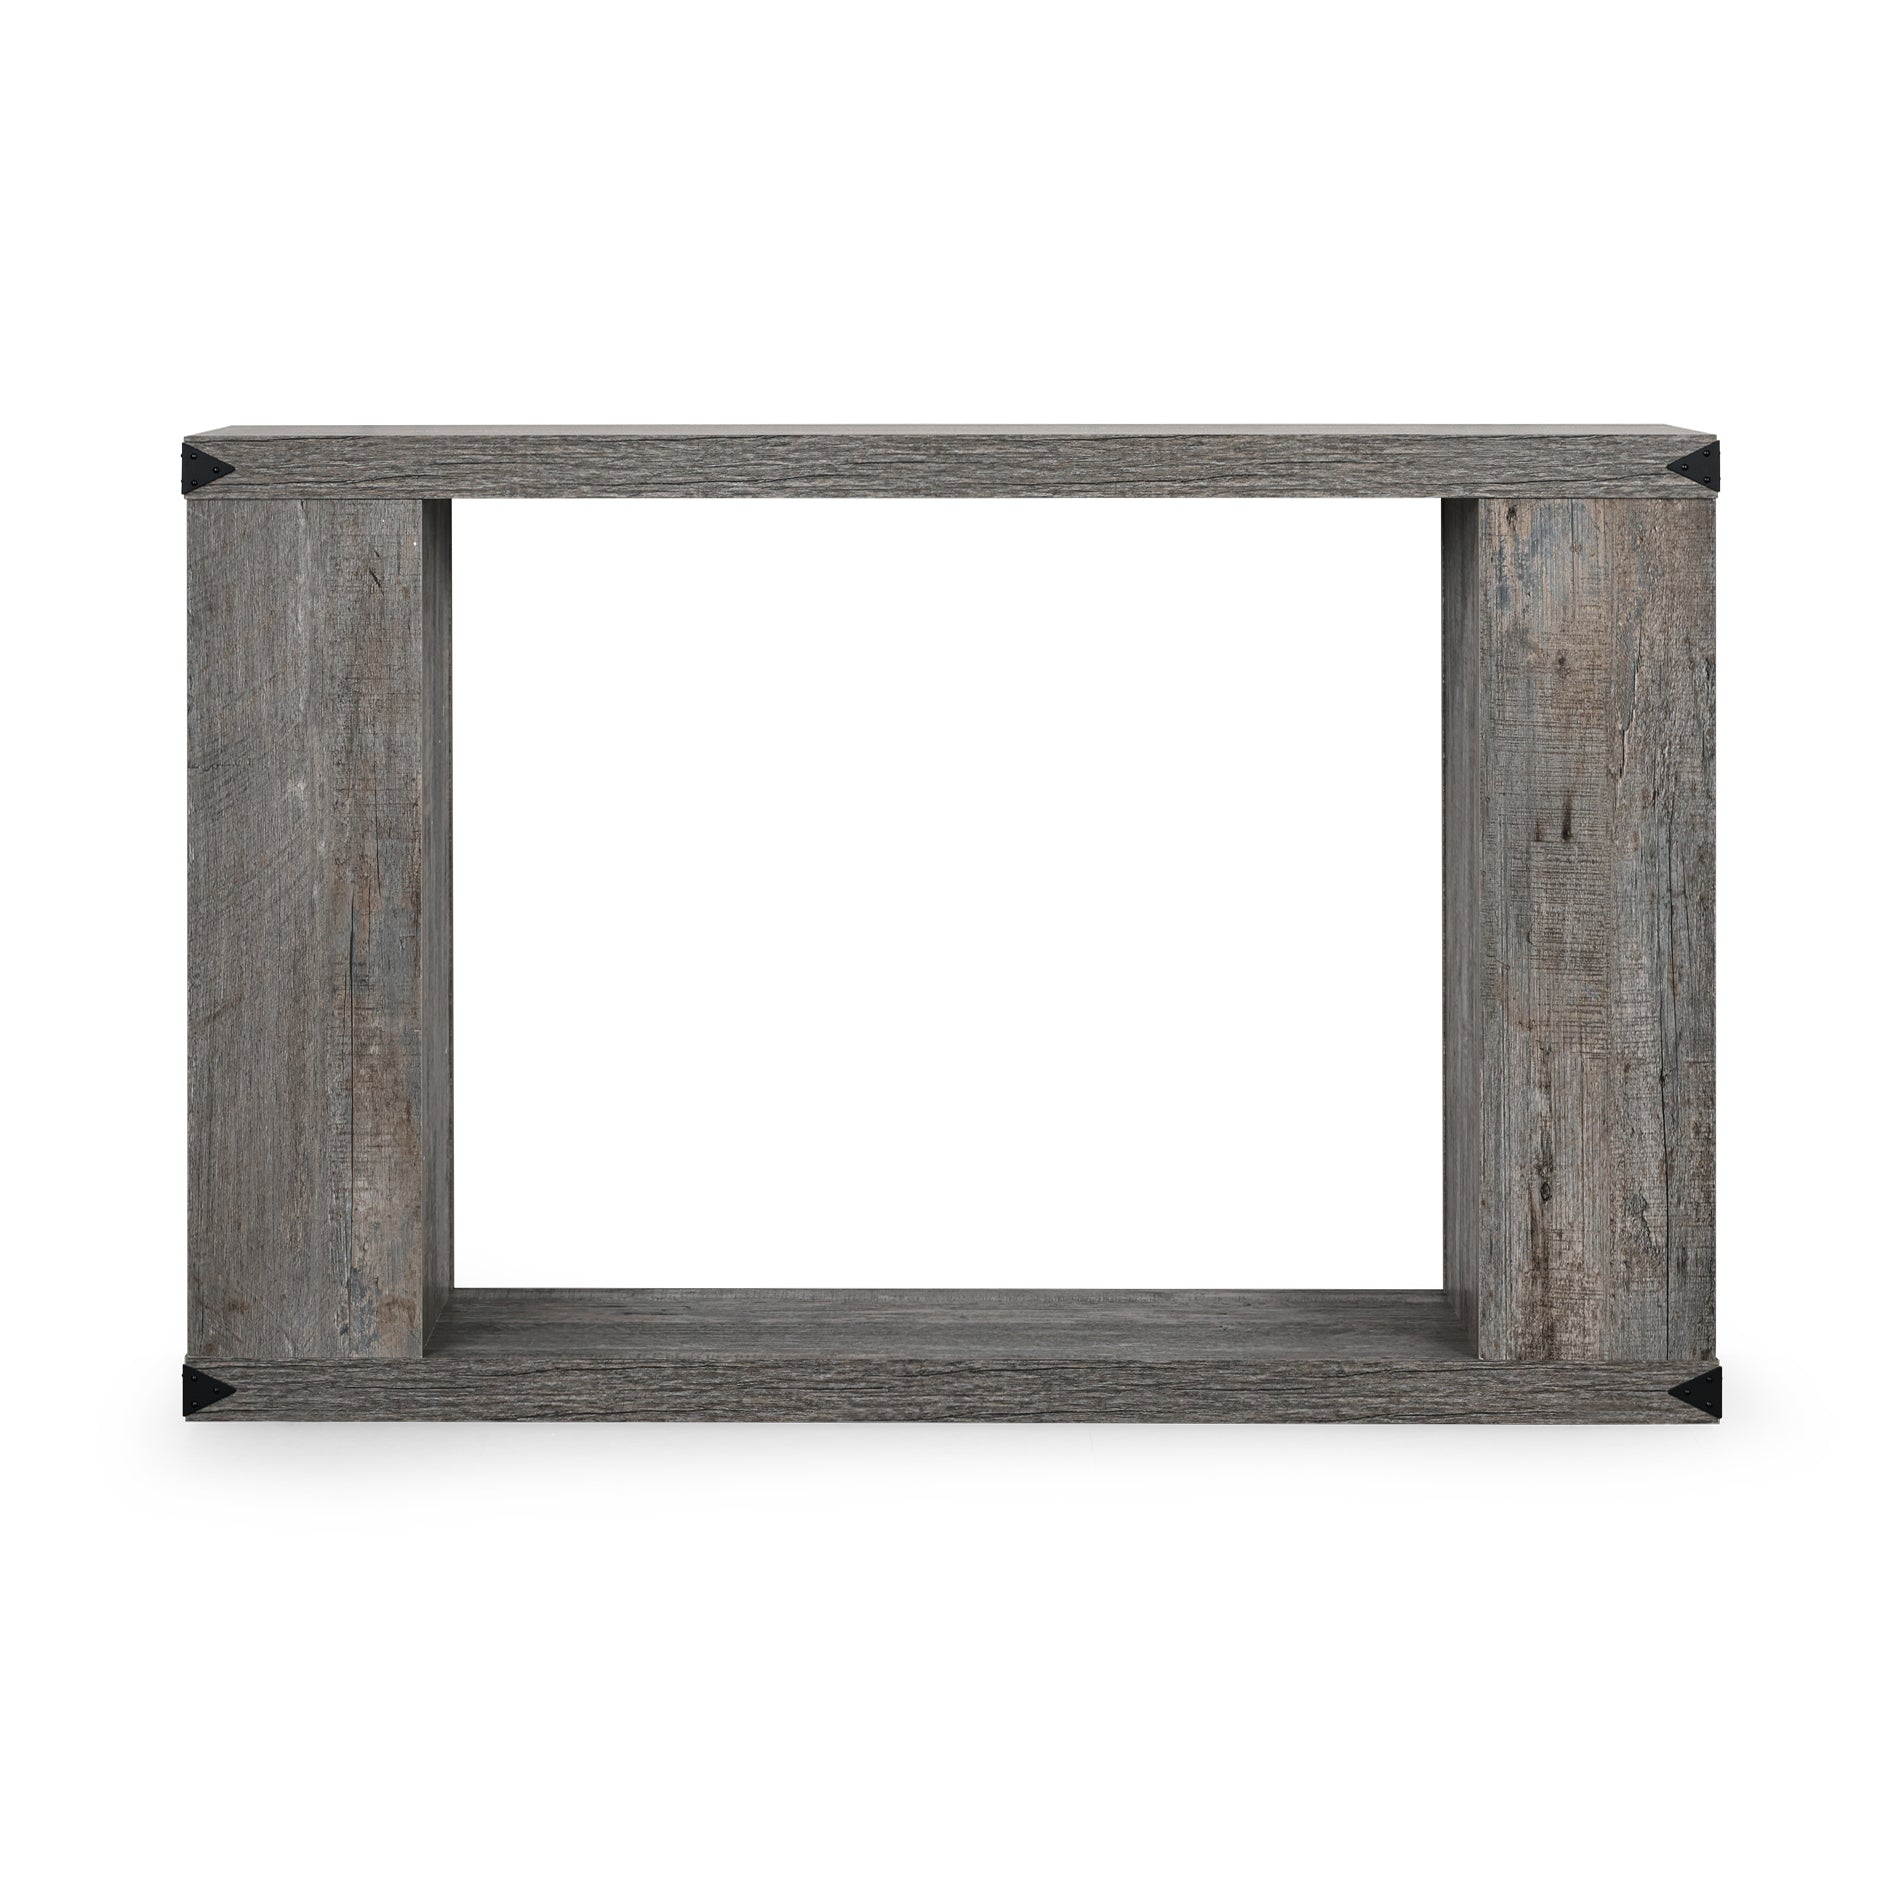 WAMPAT 46" Farmhouse Console Table Narrow Wood Extra Long Accent Entry Table for Hallway, Vintage Grey